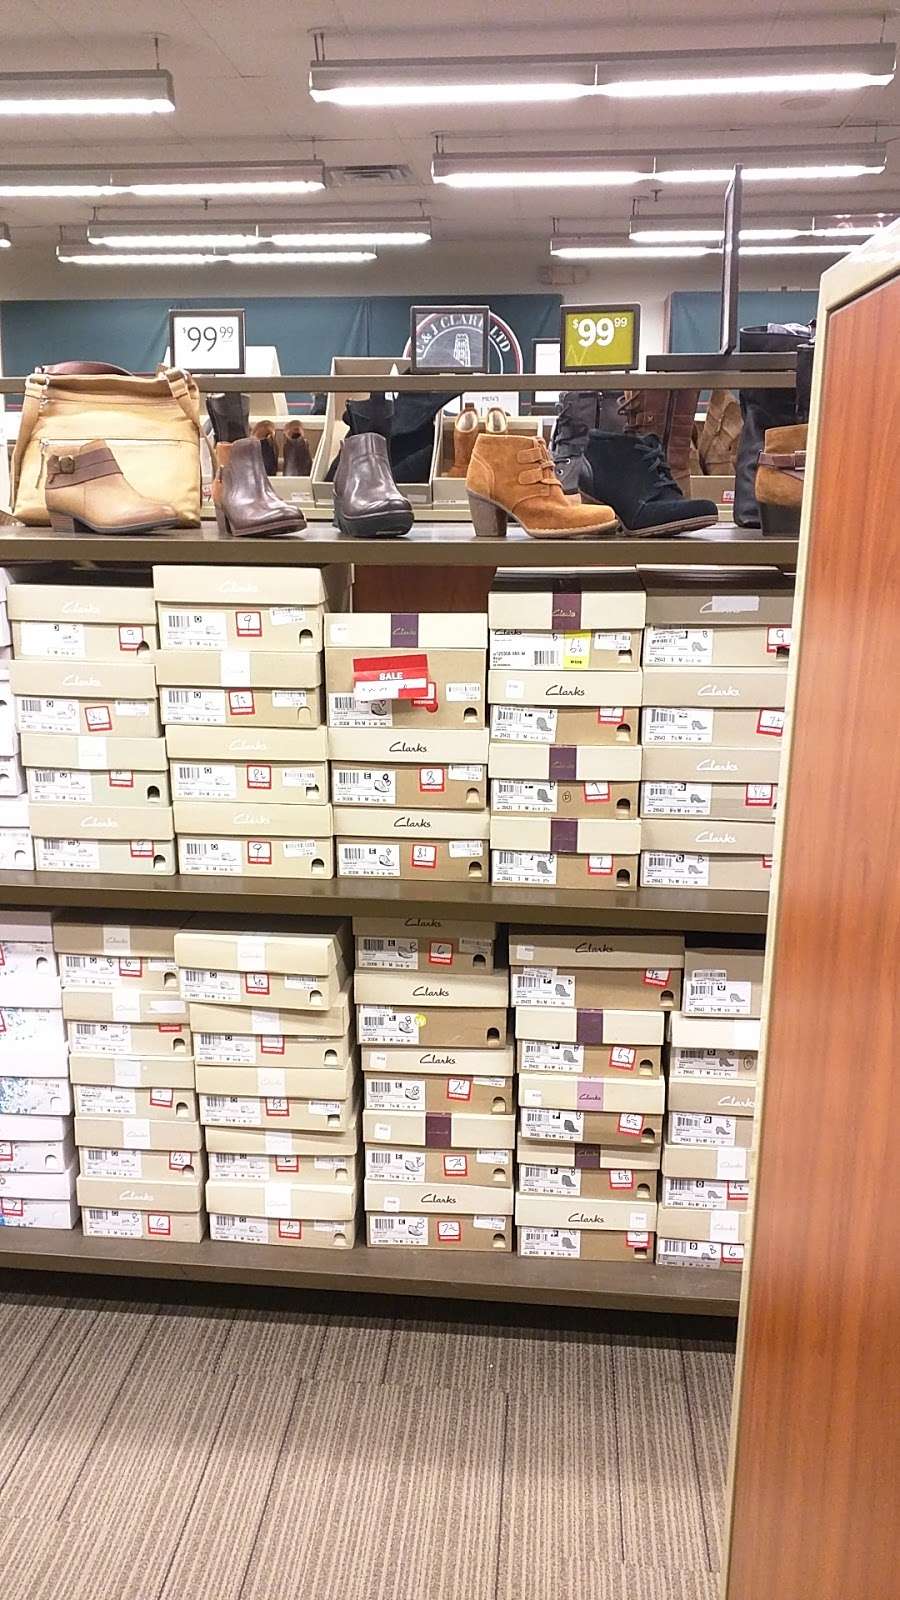 Clarks Bostonian Outlet | 209 Red Apple Ct, Central Valley, NY 10917 | Phone: (845) 928-5248